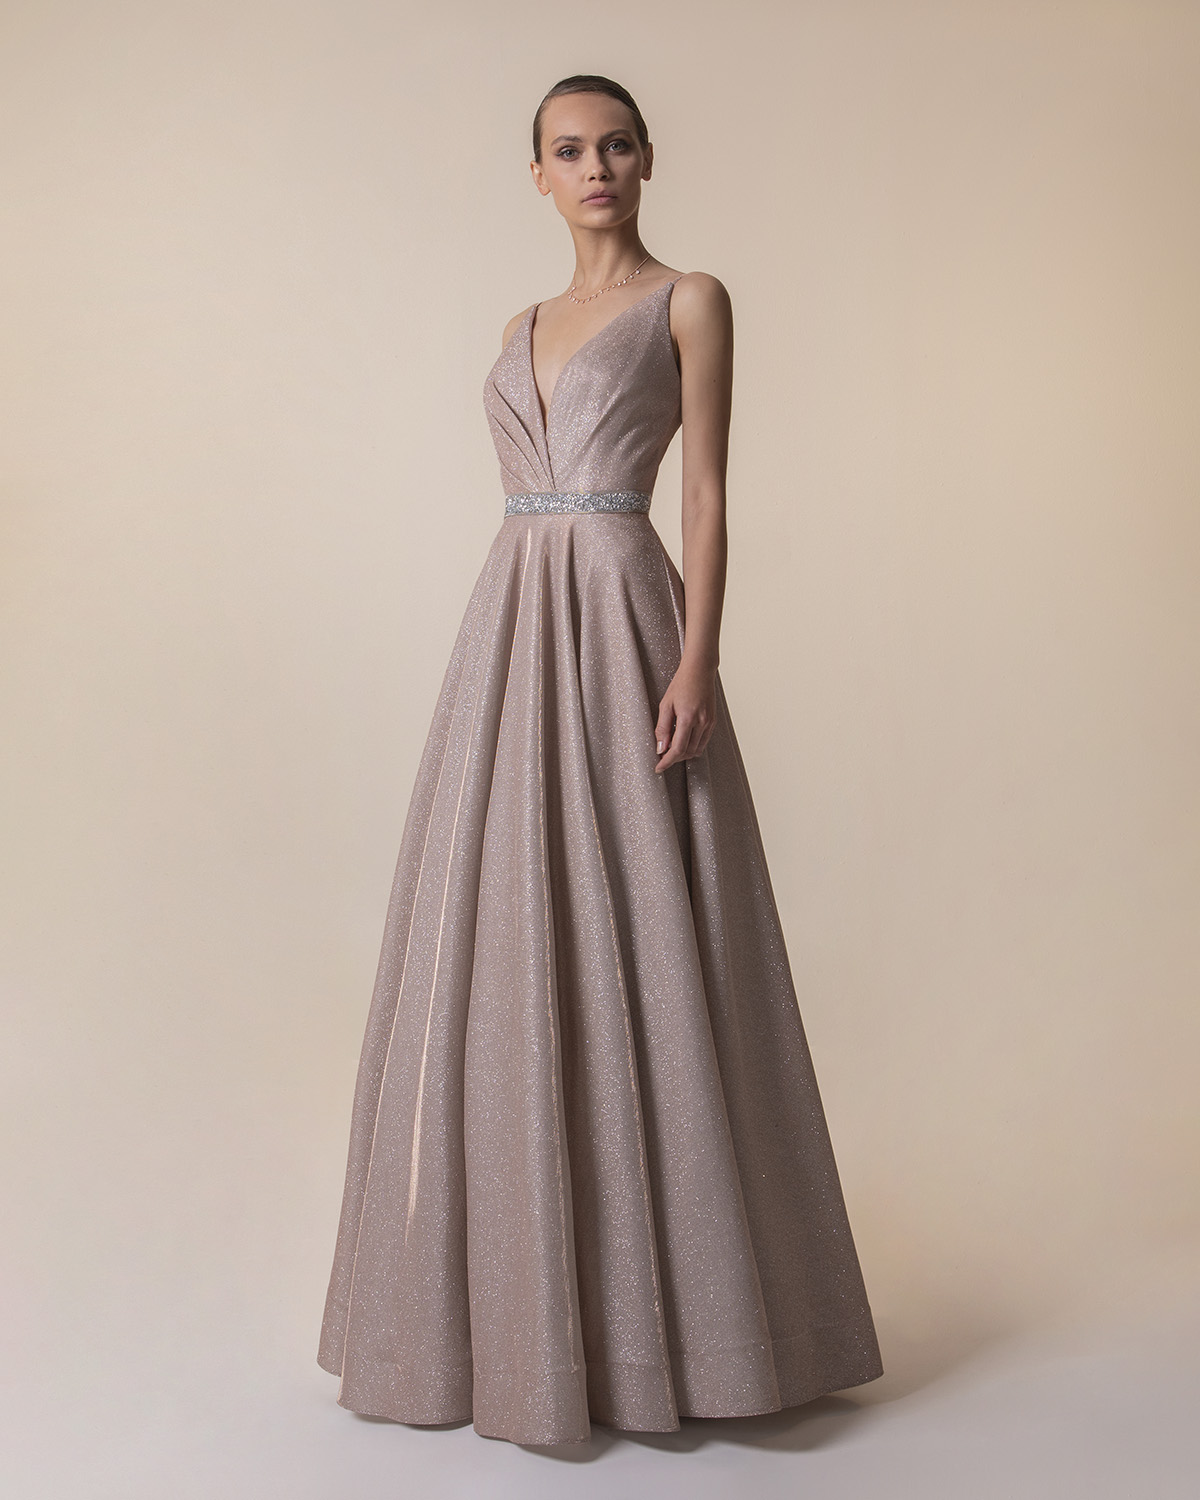 Evening Dresses / Long evening dress with shining fabric and beading around the waist